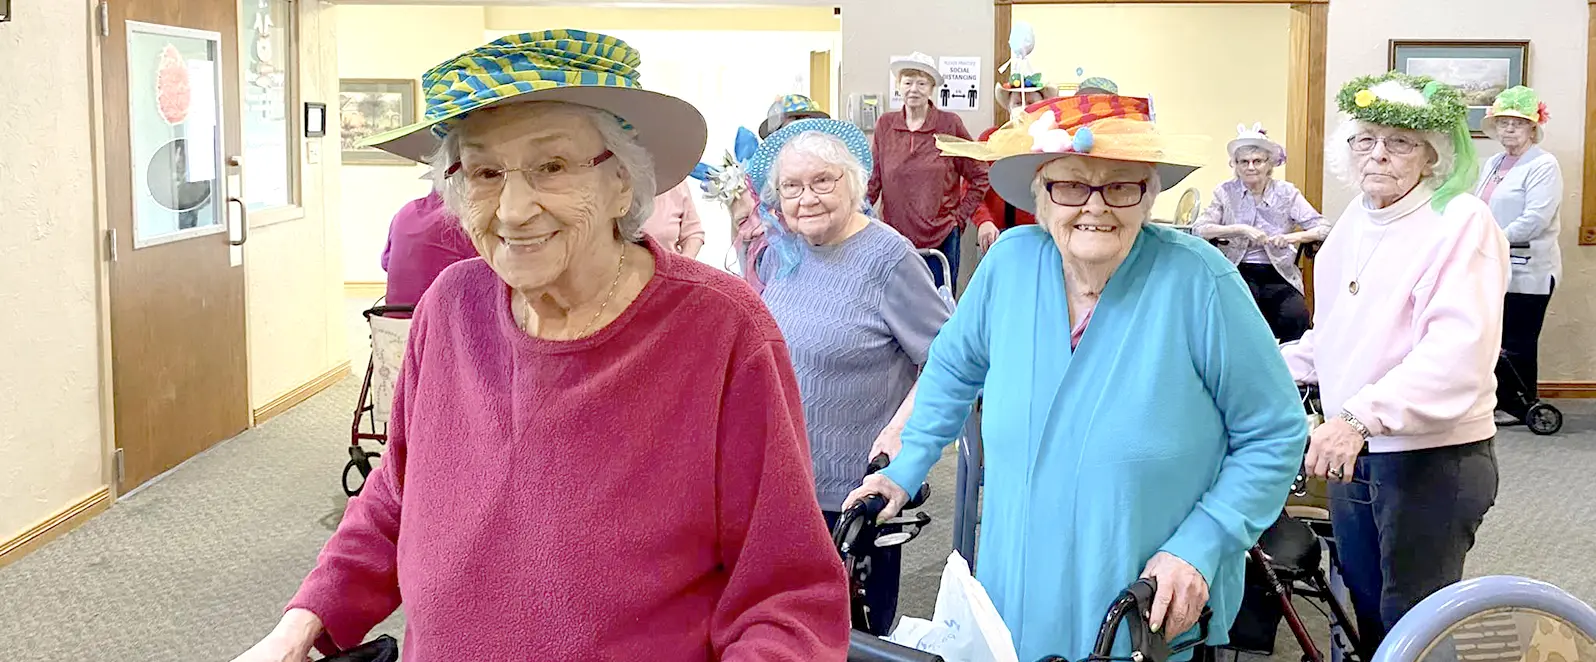 Women smiling and wearing hats